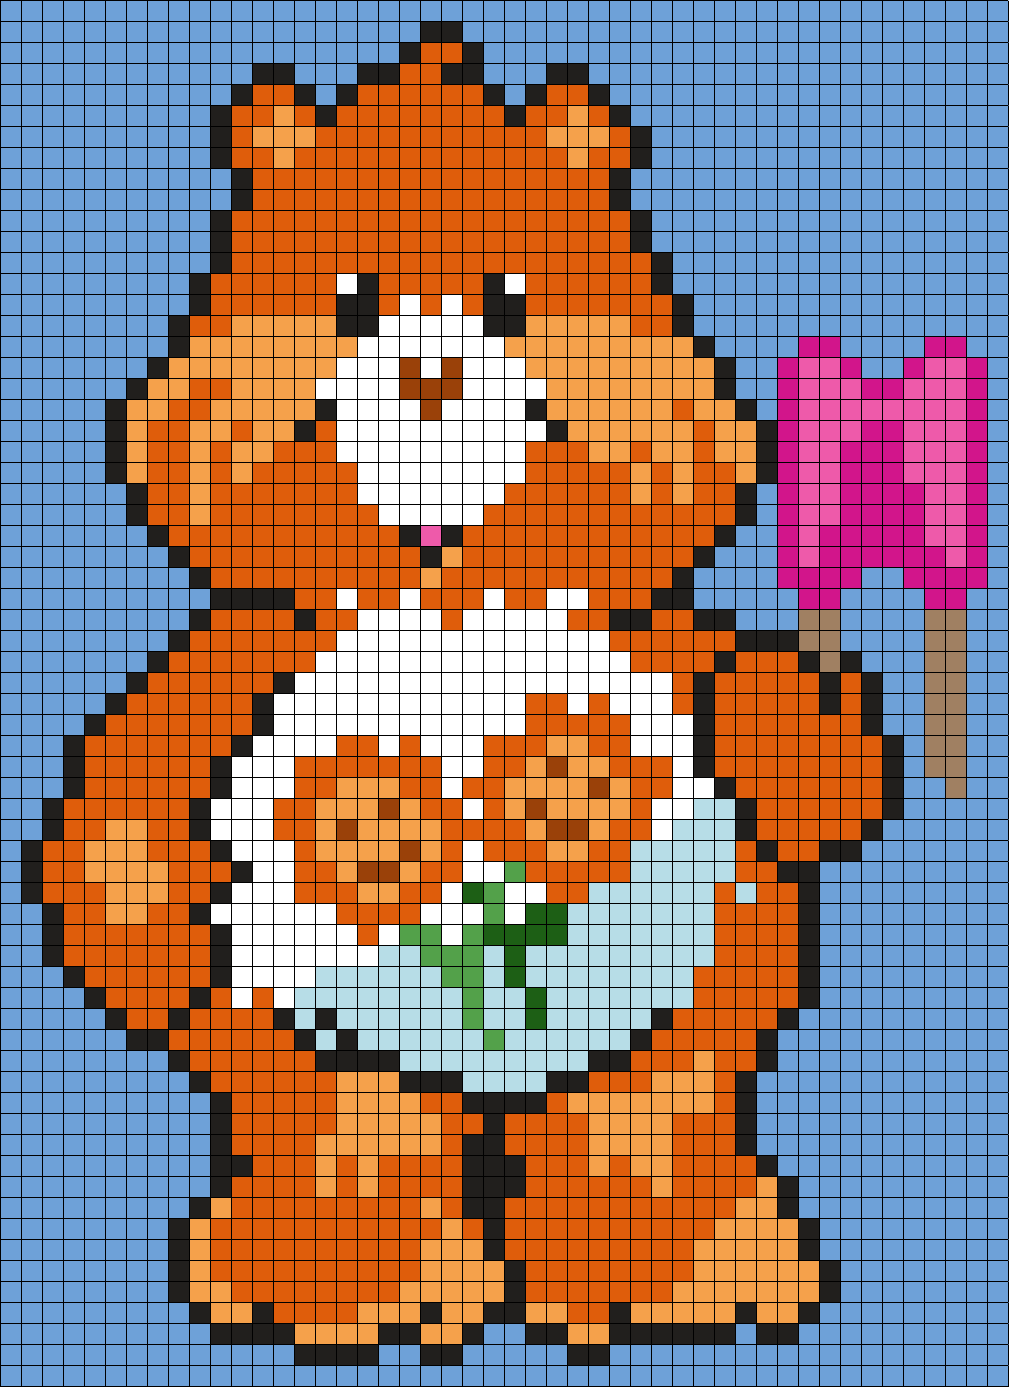 Friend Bear From The Care Bears (Square)